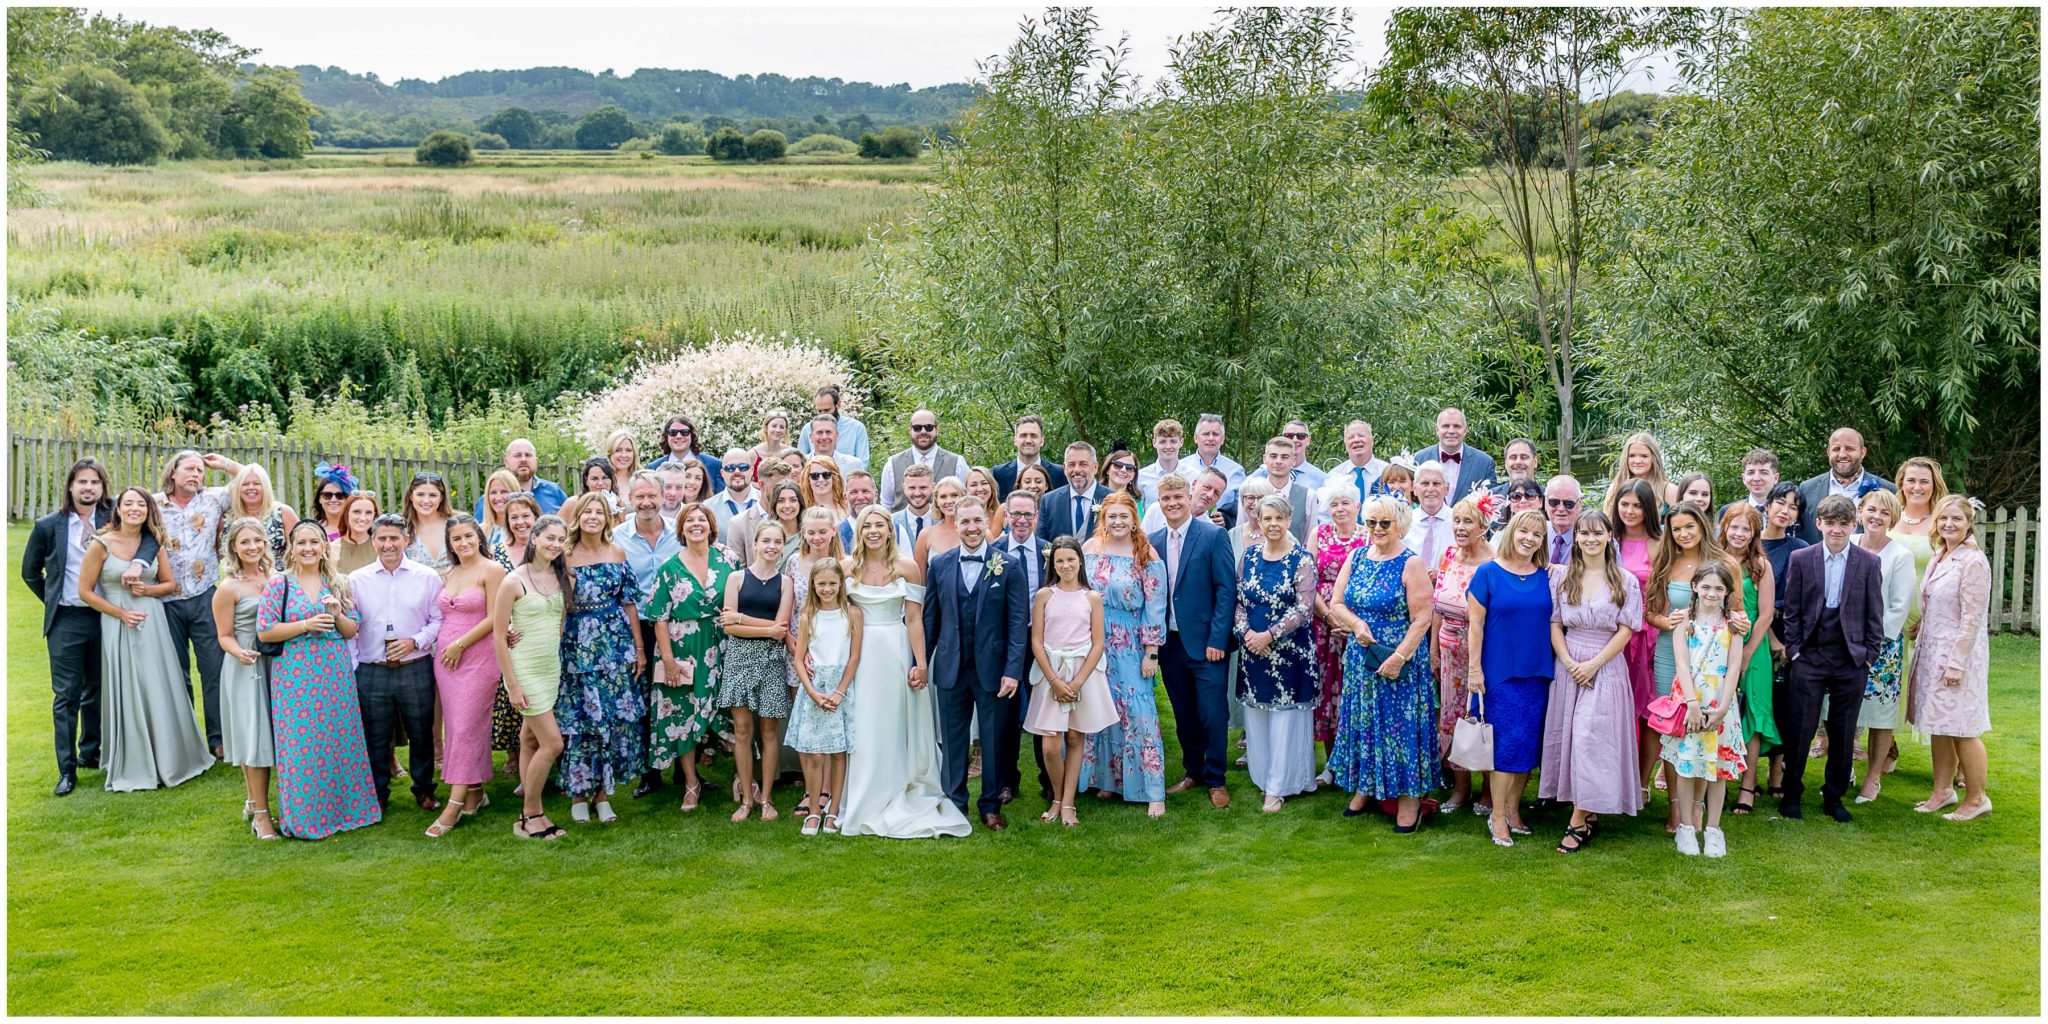 The group photograph of all guests with Dorset water meadows and countryside in the background